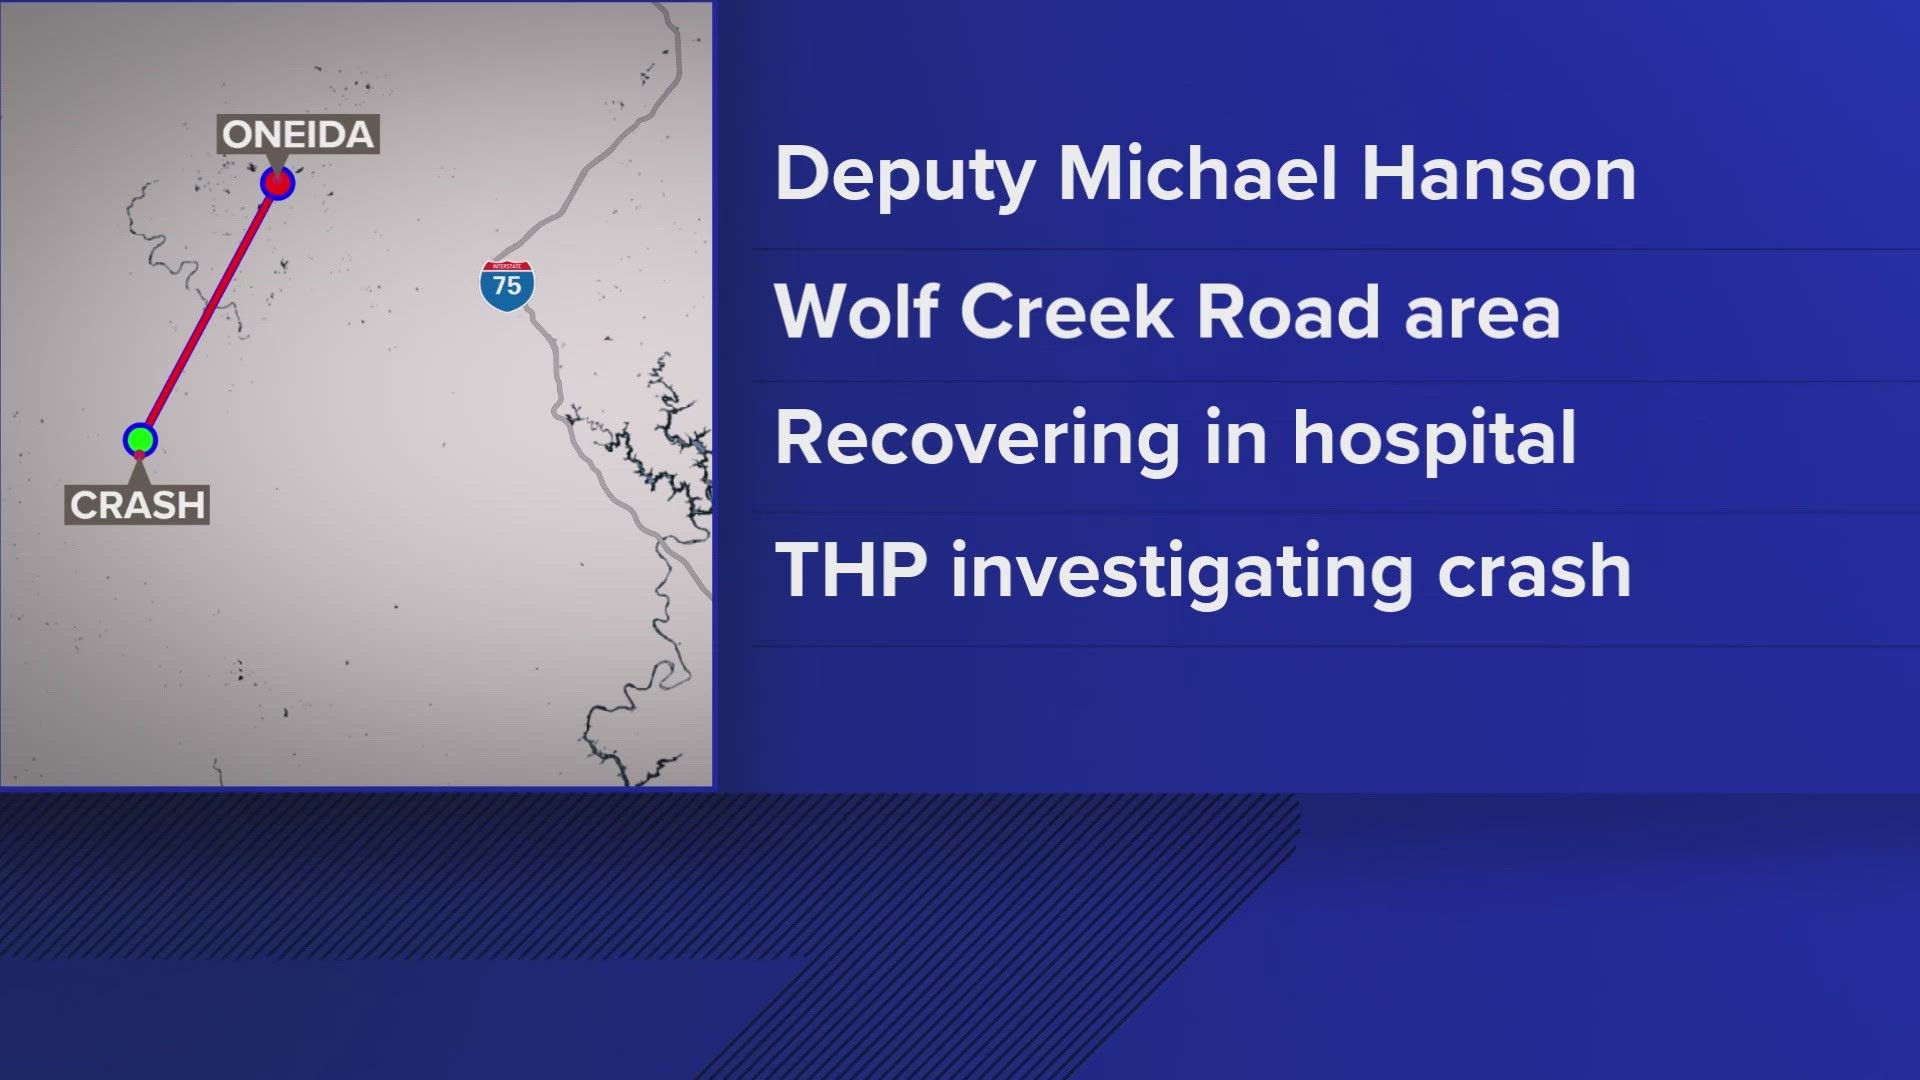 Officials said the deputy was taken to UT Medical Center where he will undergo further treatment and observation.